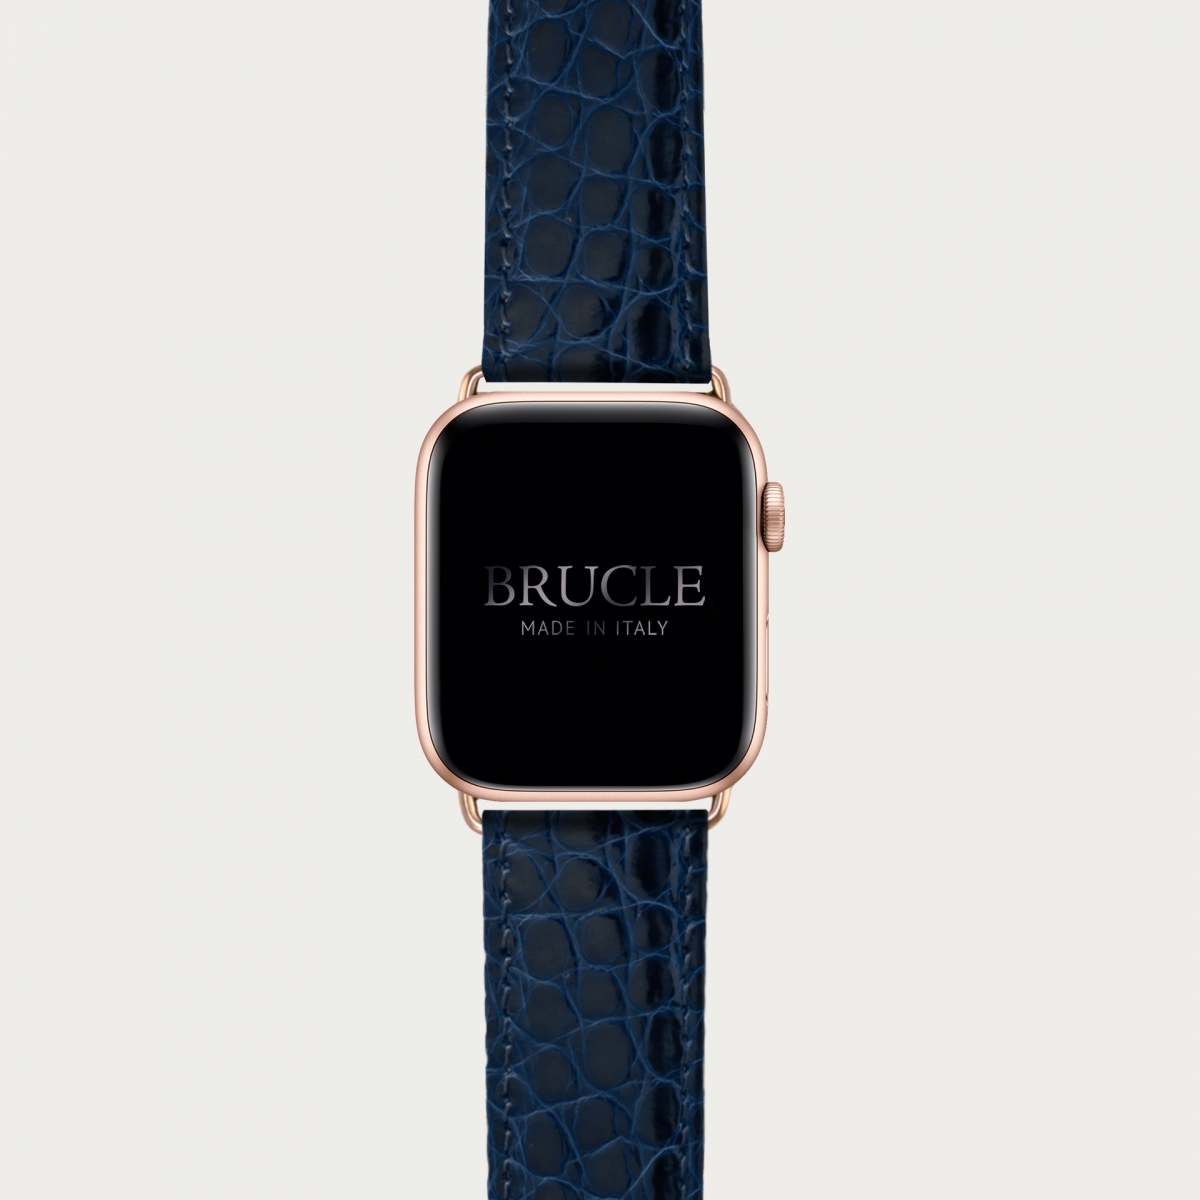 BRUCLE Navy blue Alligator leather watch band compatible with Apple Watch / Samsung smartwatch